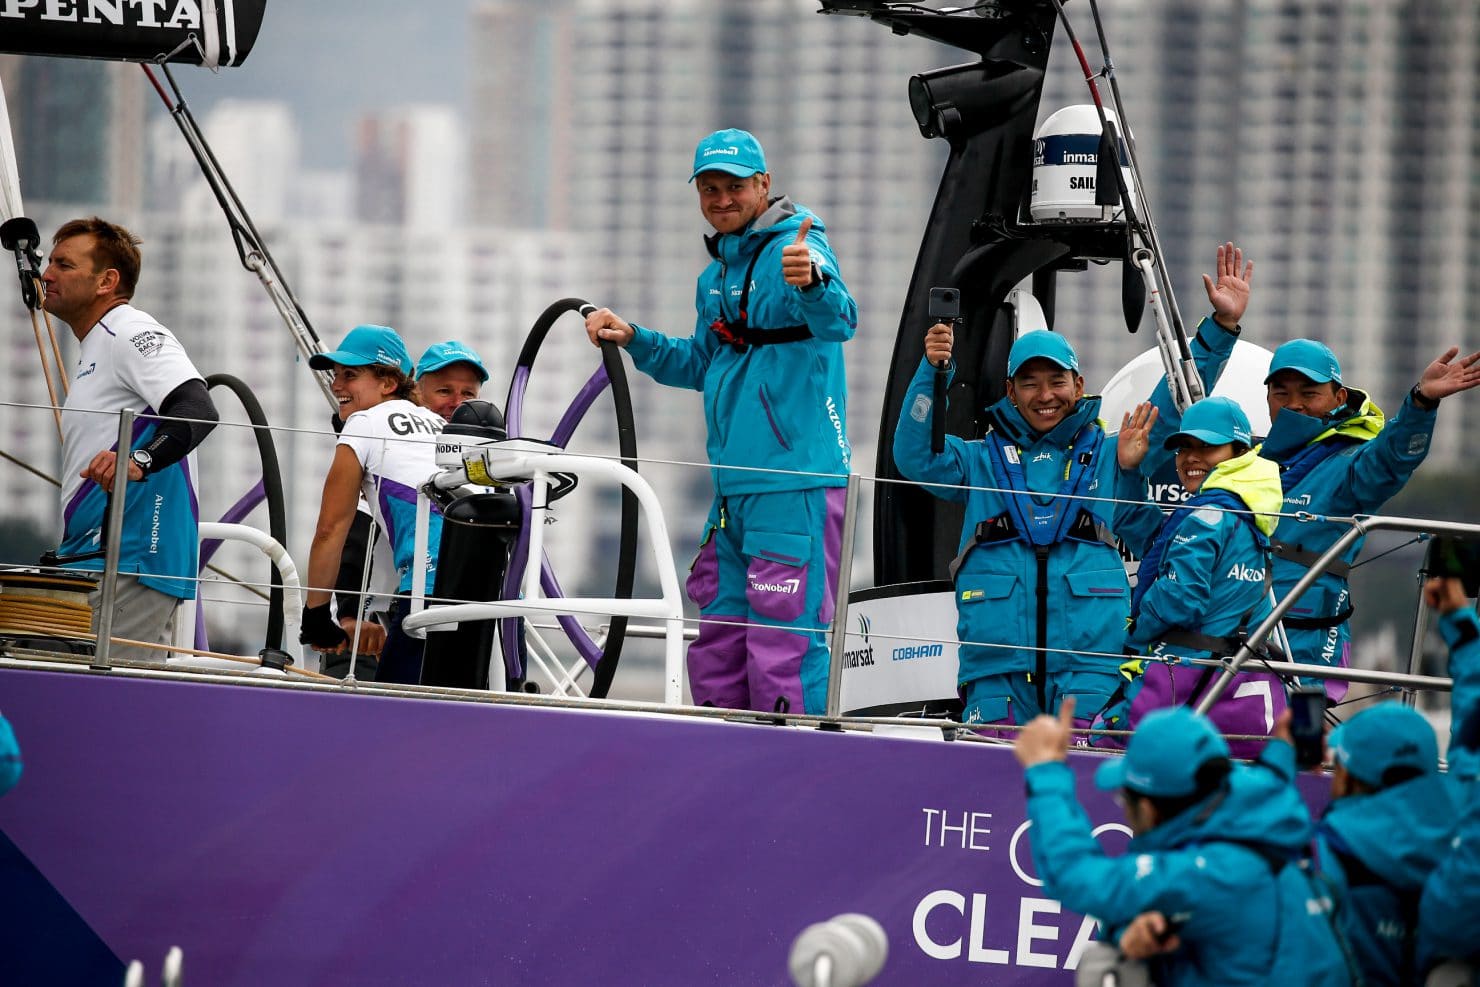 Emotion,Guests,Celebration,Nicolai Sehested,2017-18,AkzoNobel,port, host city,Kind of picture,HGC In-Port Race Hong Kong